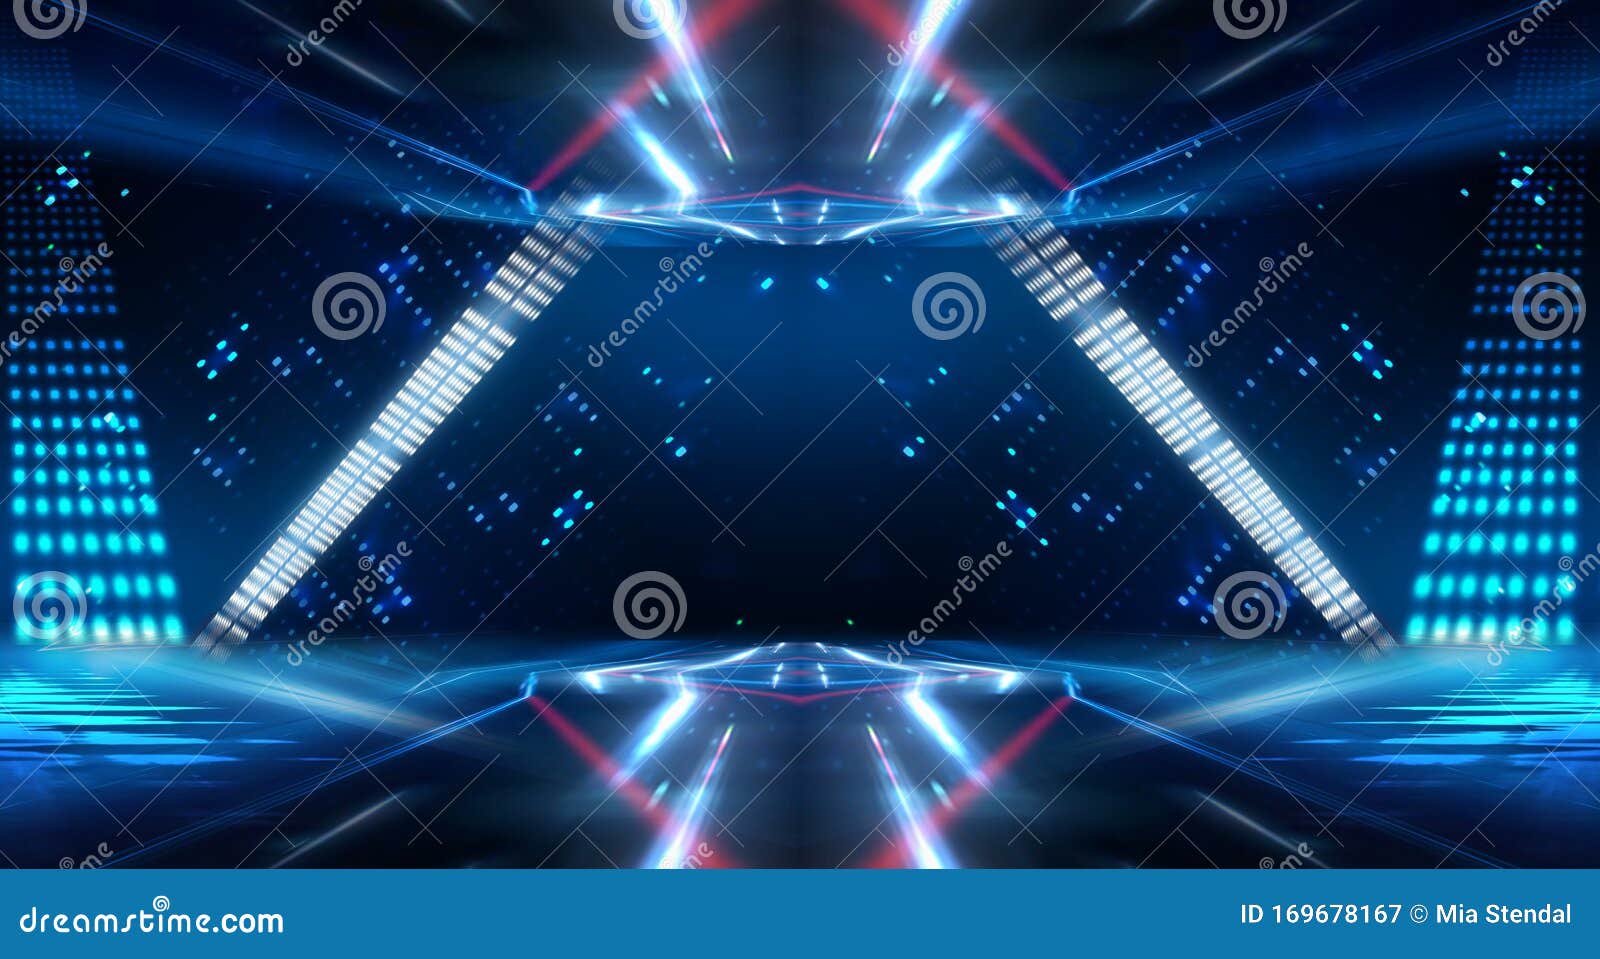 Background of Empty Stage Show. Neon Blue and Purple Light and Laser Show.  Laser Futuristic Shapes on a Dark Background. Abstract Stock Image - Image  of lights, line: 169678167